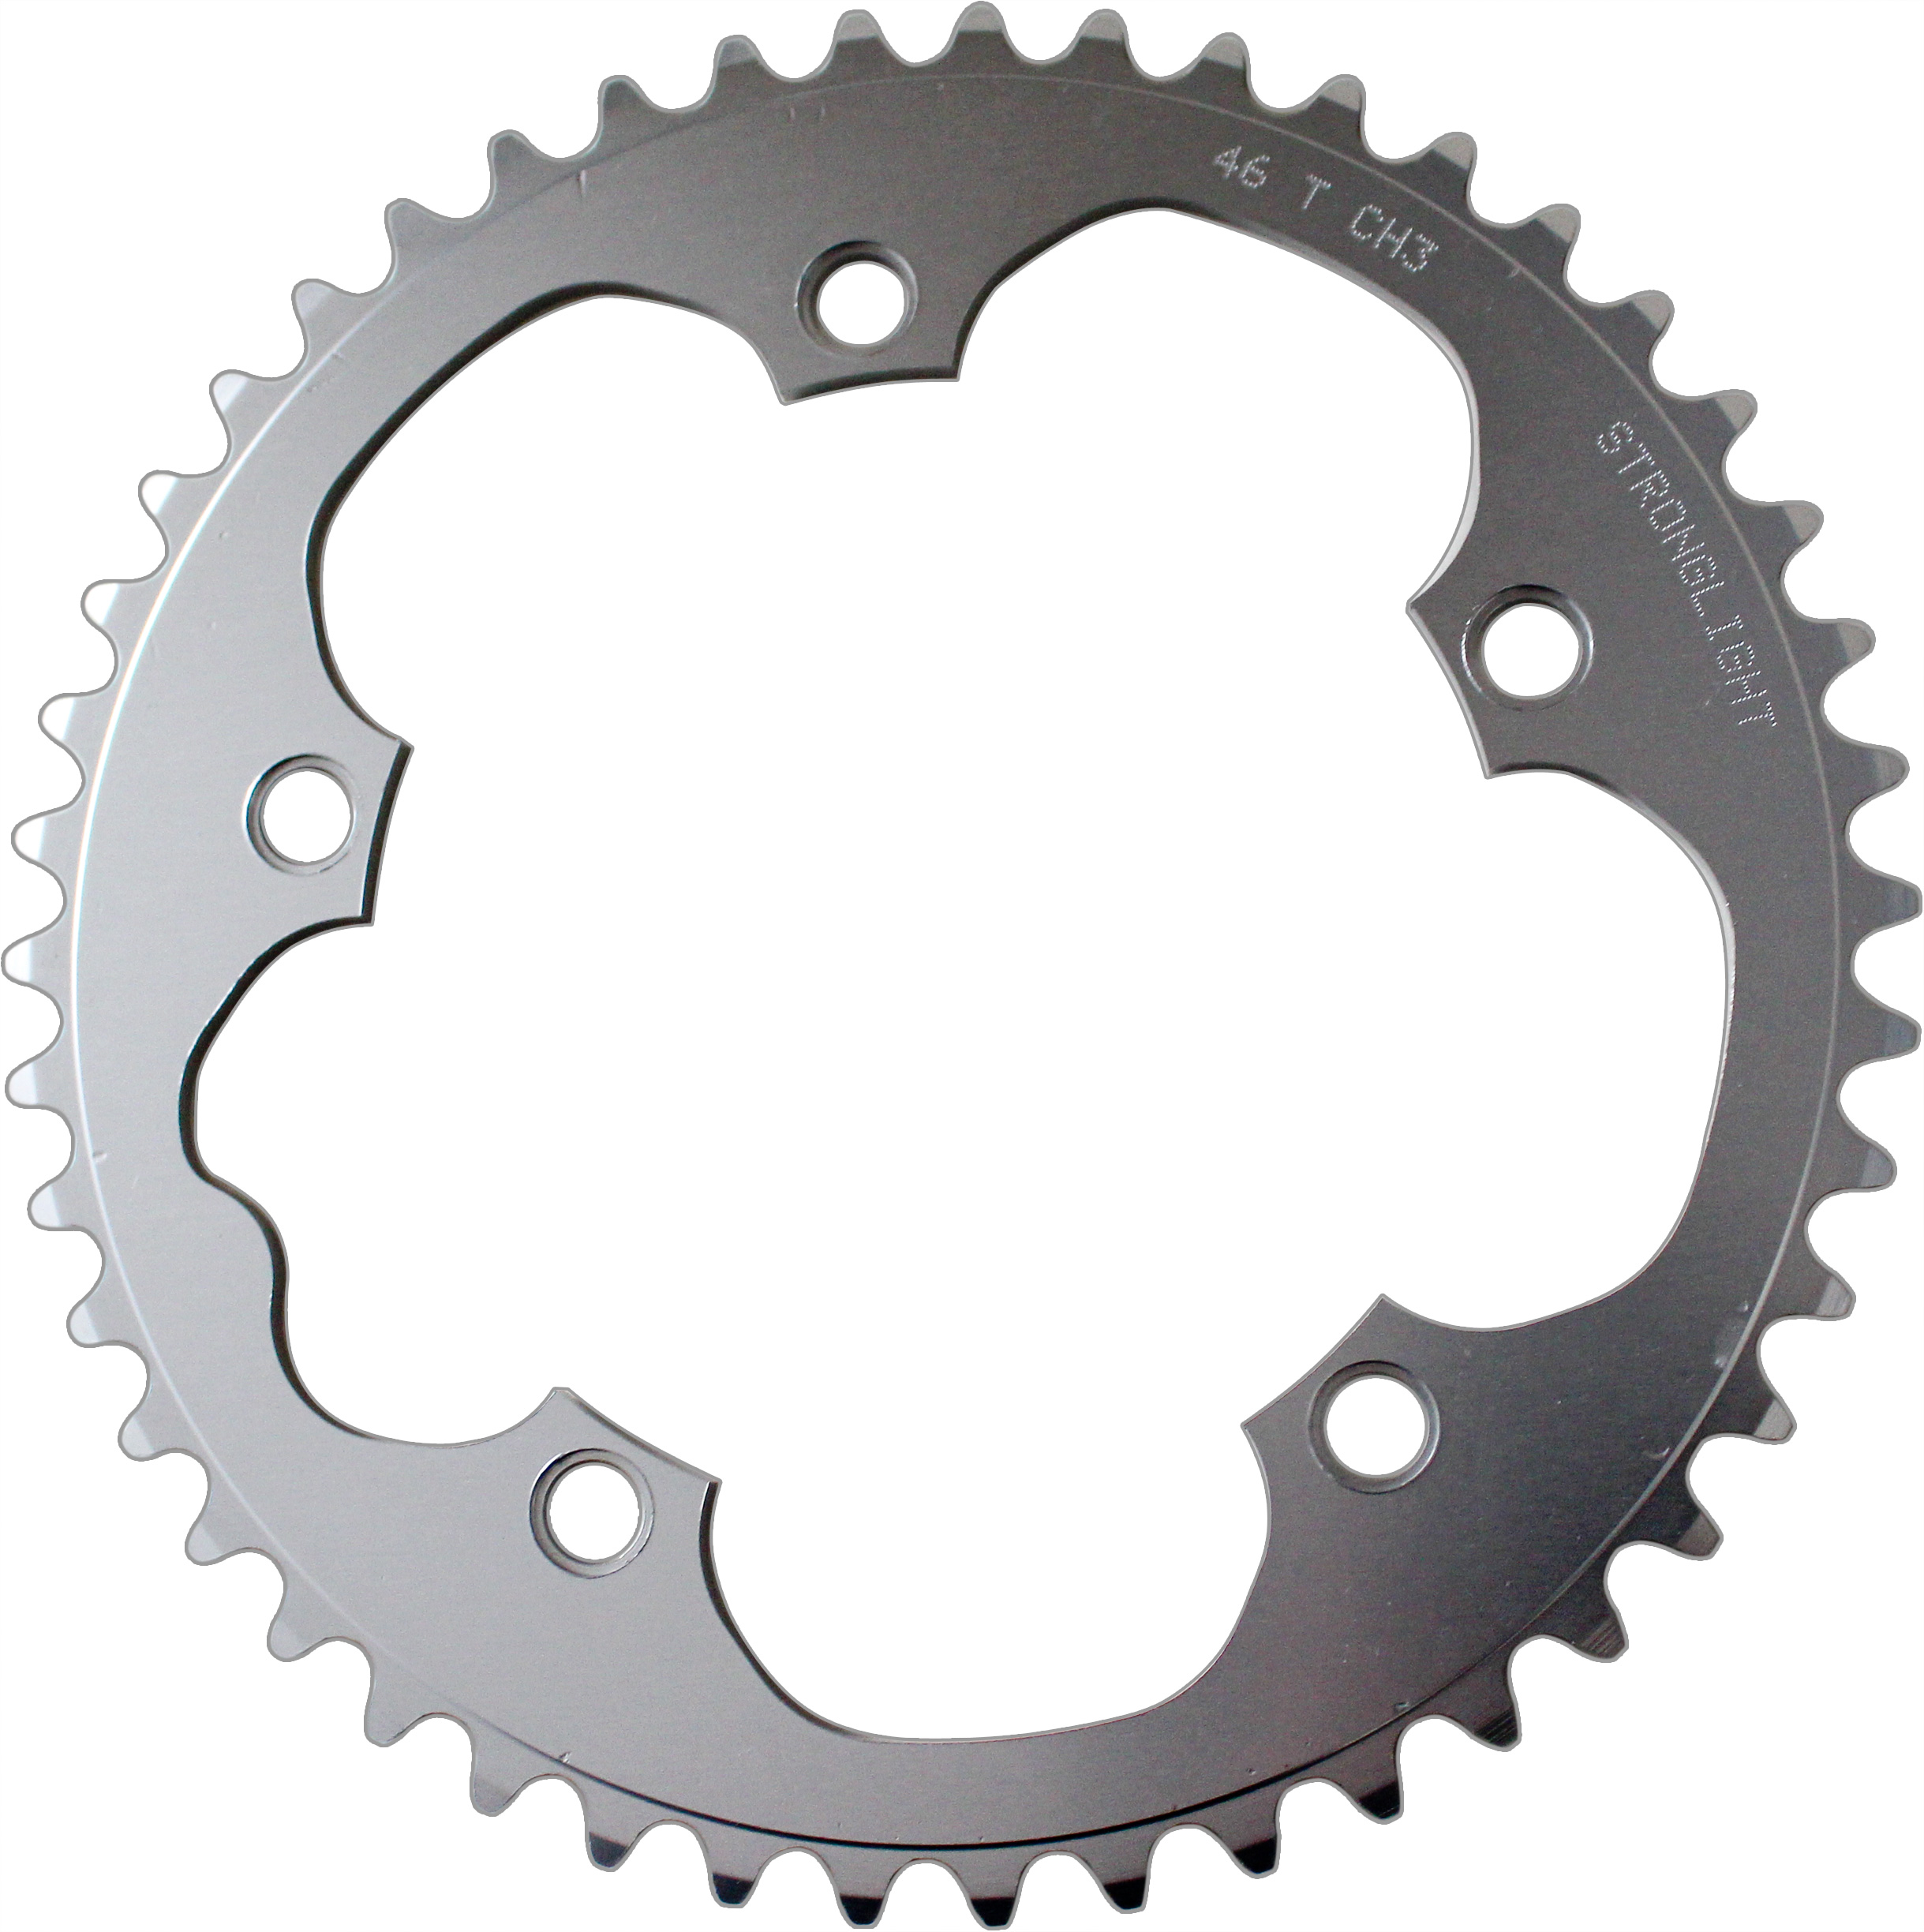 RTE130S46 Stronglight 46T 5-Arm/130mm Track Chainring